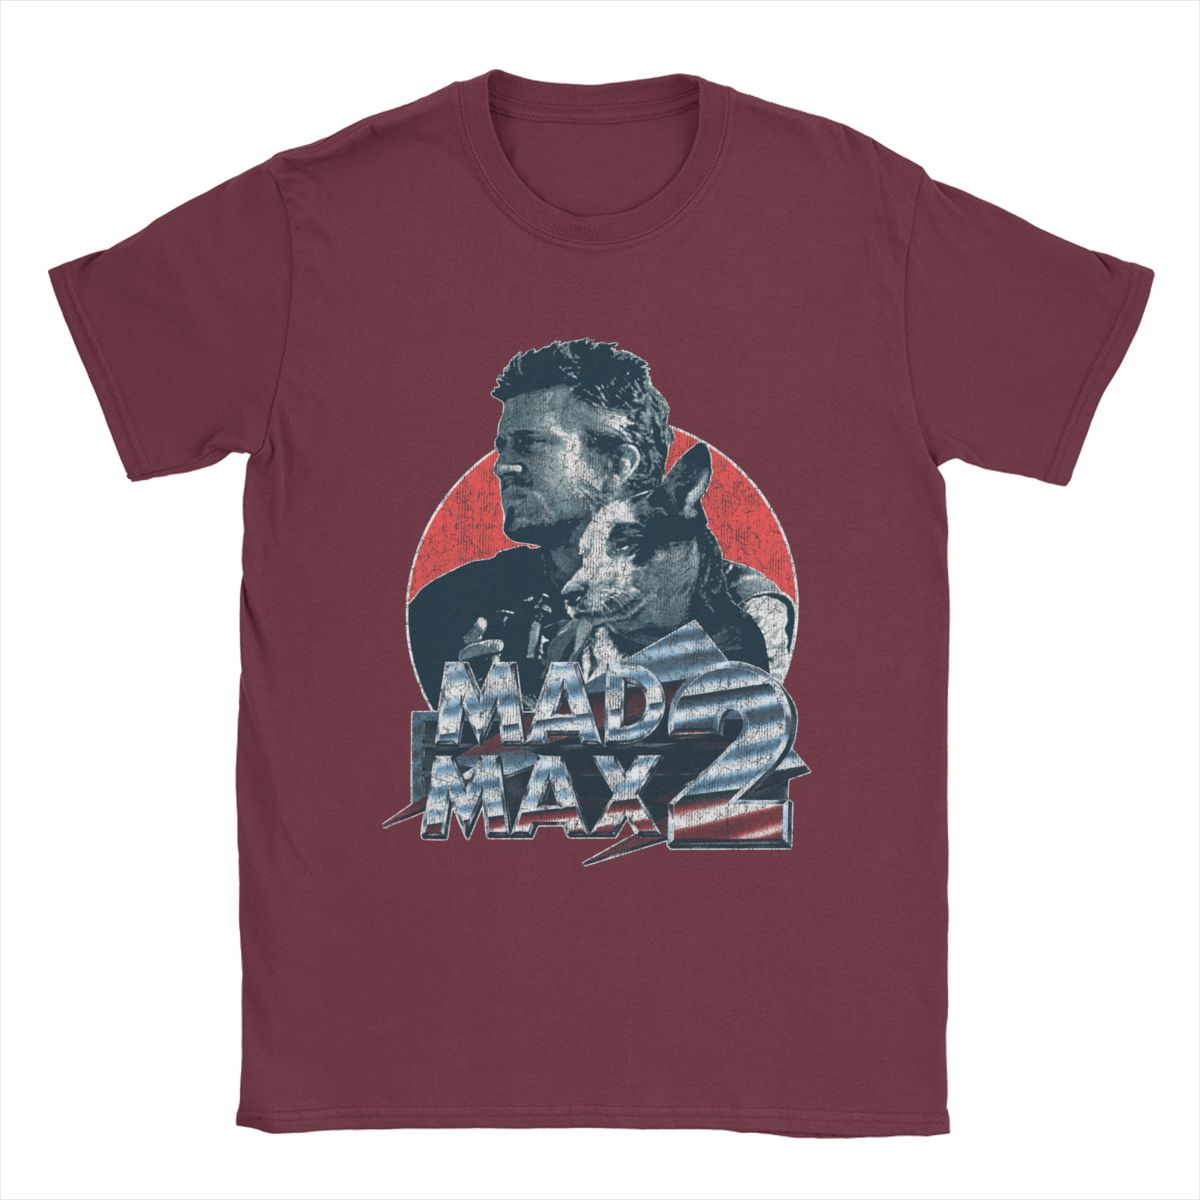 Mad Max - T-Shirt 100% Cotton - Classic 1980's Action - Movie Buff Fanwear-Burgundy-S-